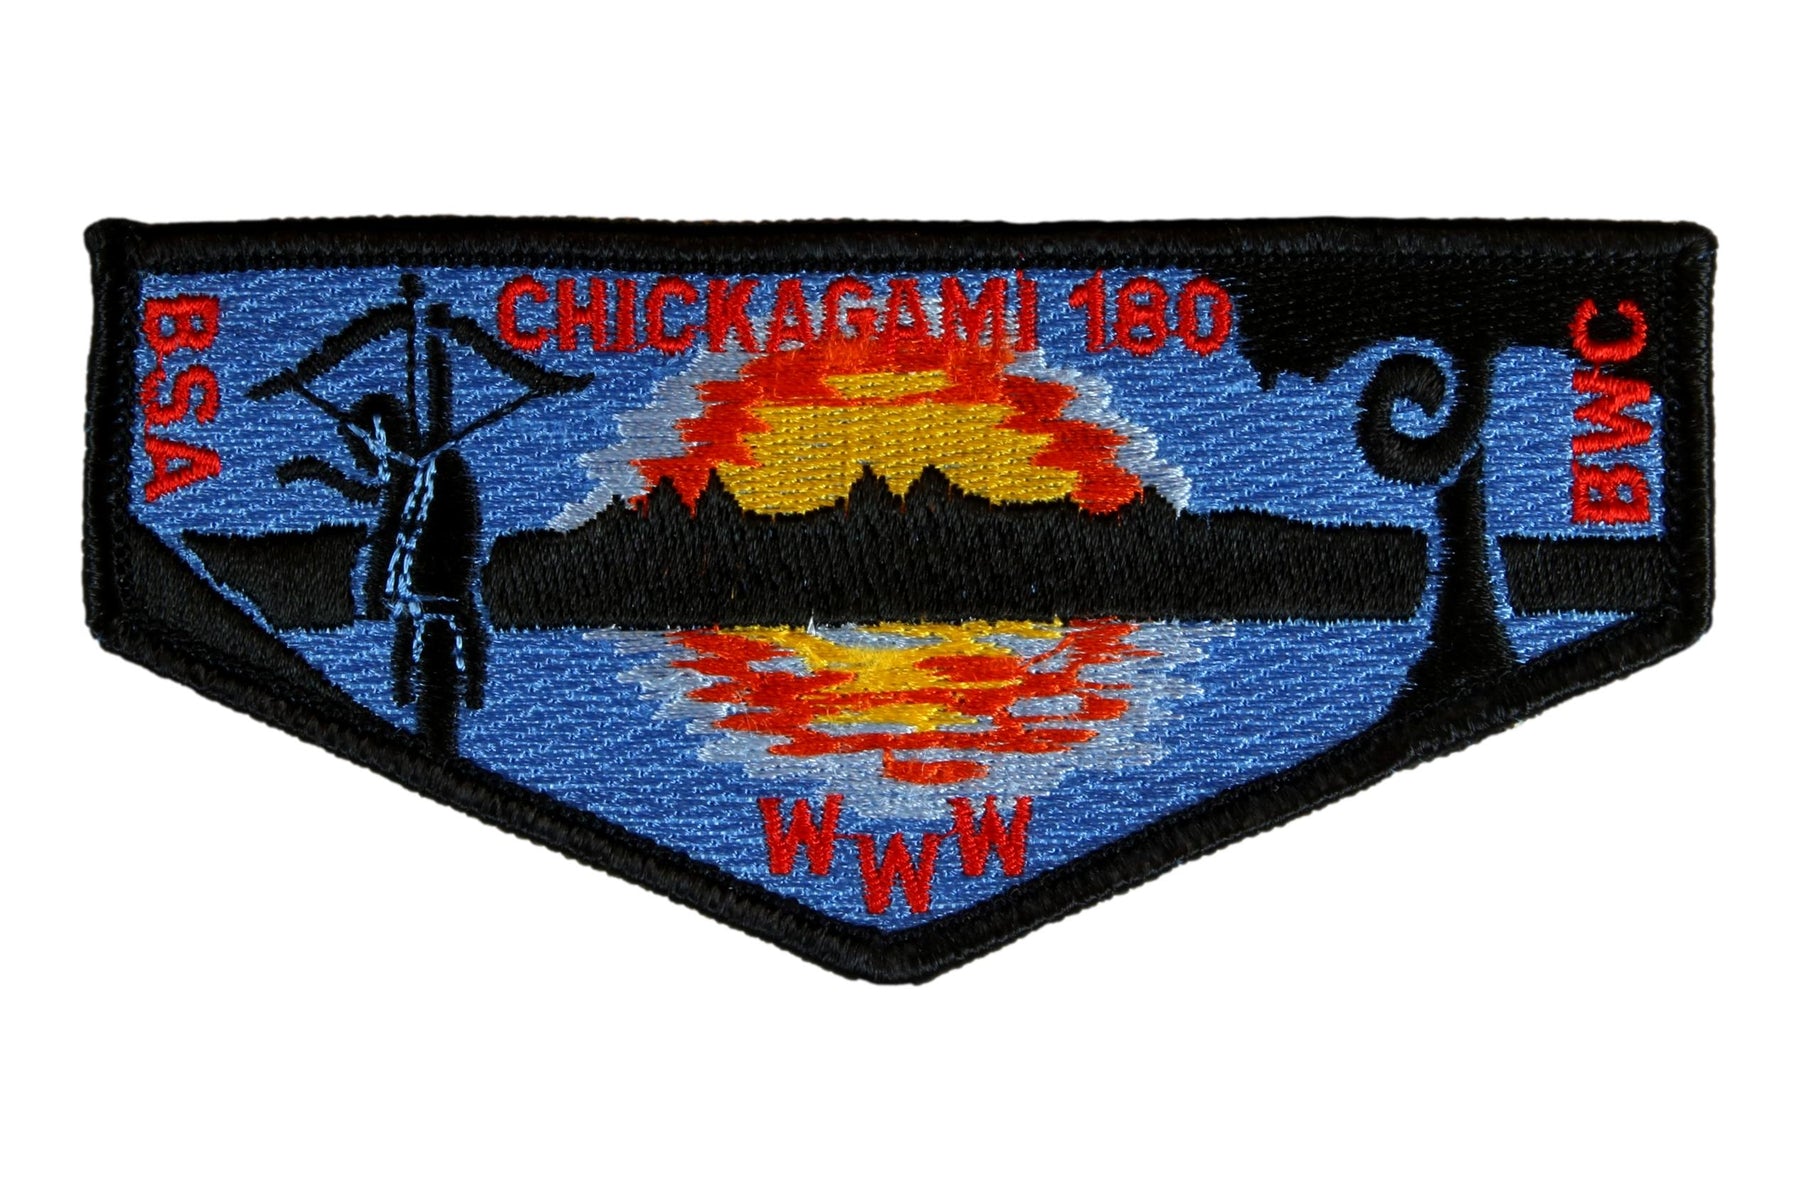 Lodge 180 Chickagami Flap S-12